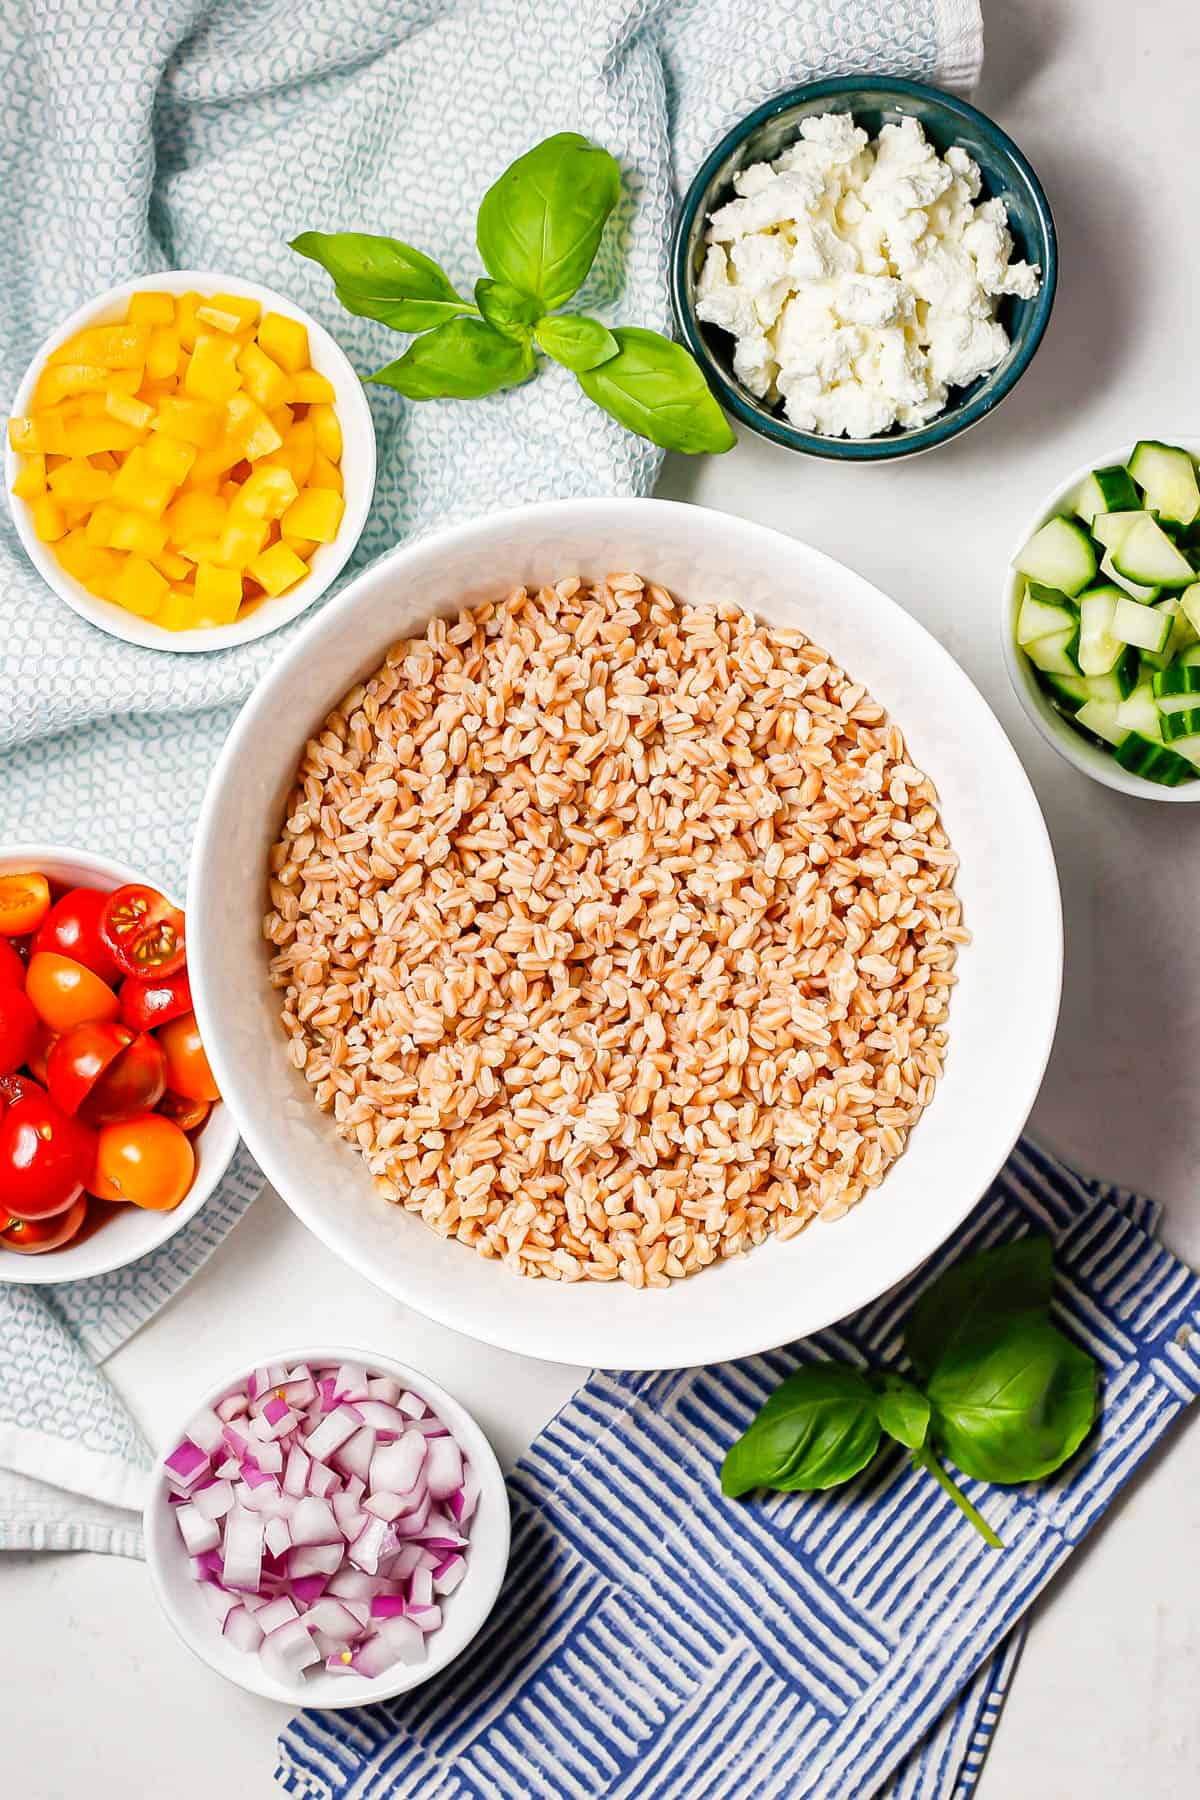 Ingredients laid out in separate bowls to make a summer farro salad with veggies and goat cheese.